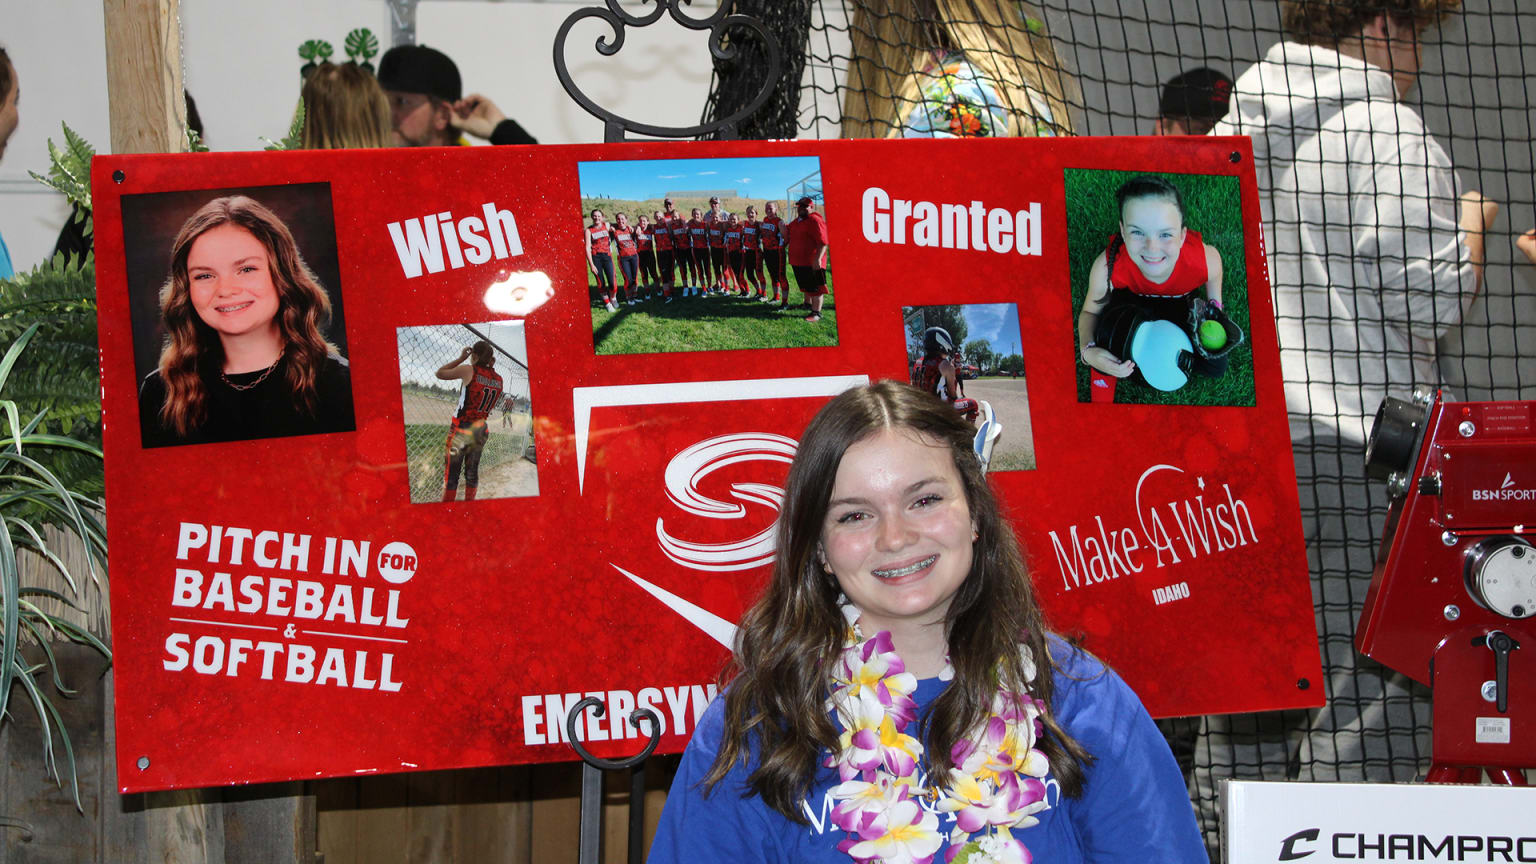 A young girl stands in front of a posterboard consisting of photographs and ''Wish Granted'' text at the top